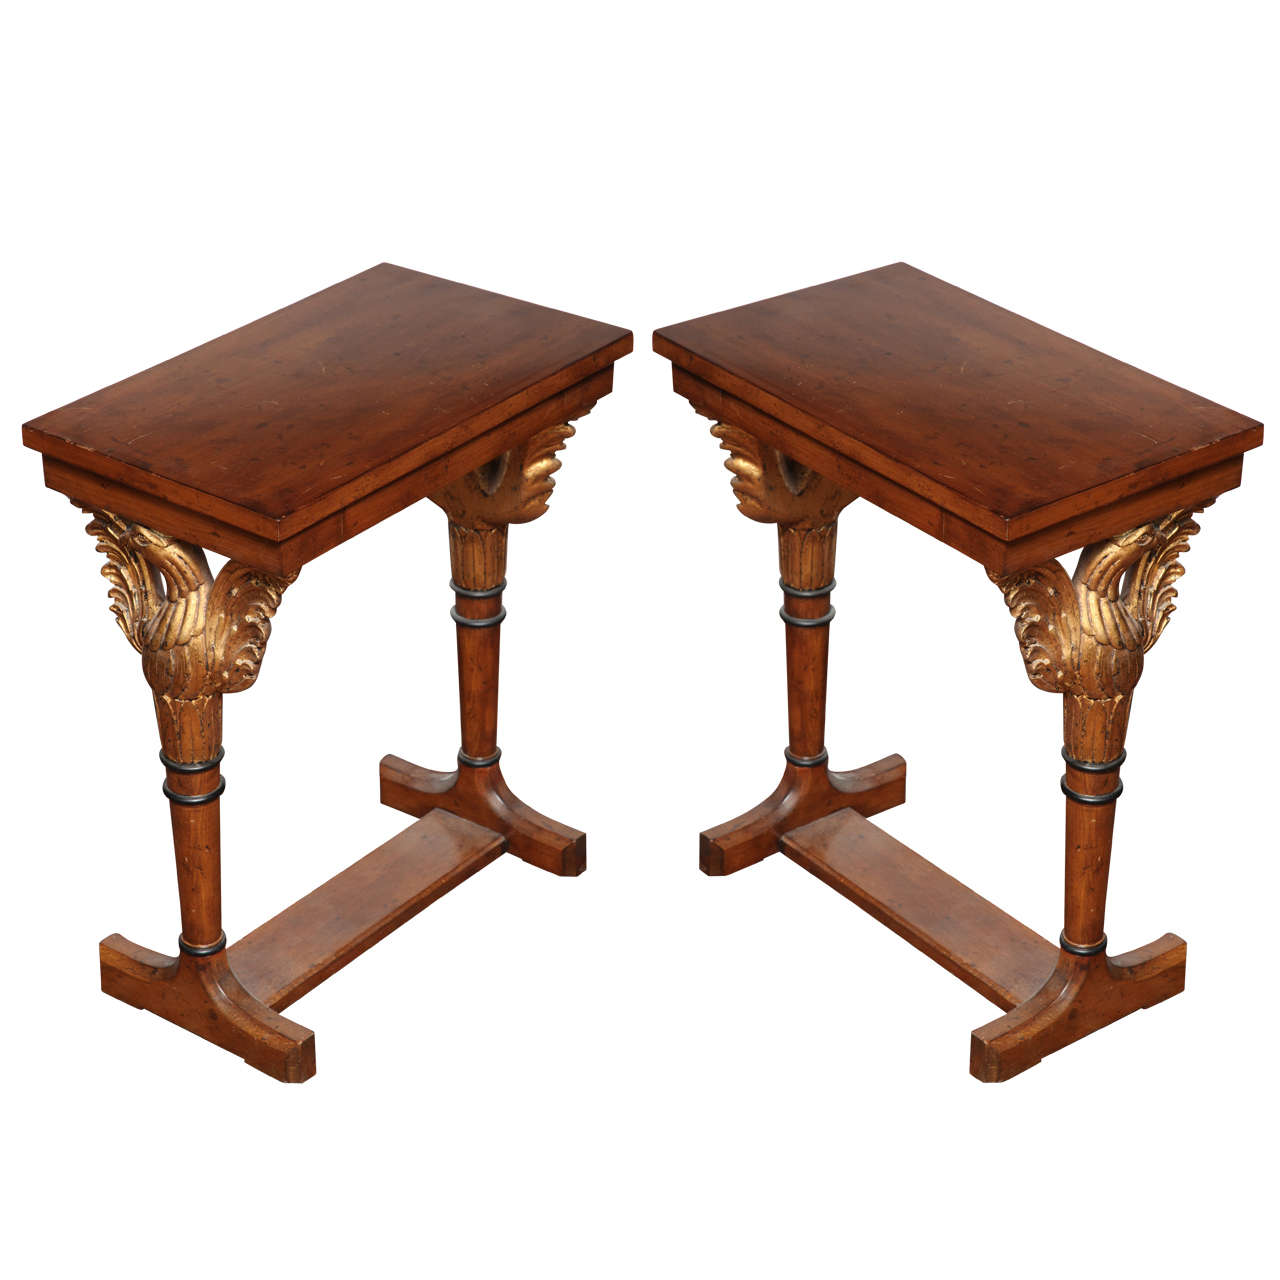 Pair of classical darkwood and giltwood side tables with eagles on side